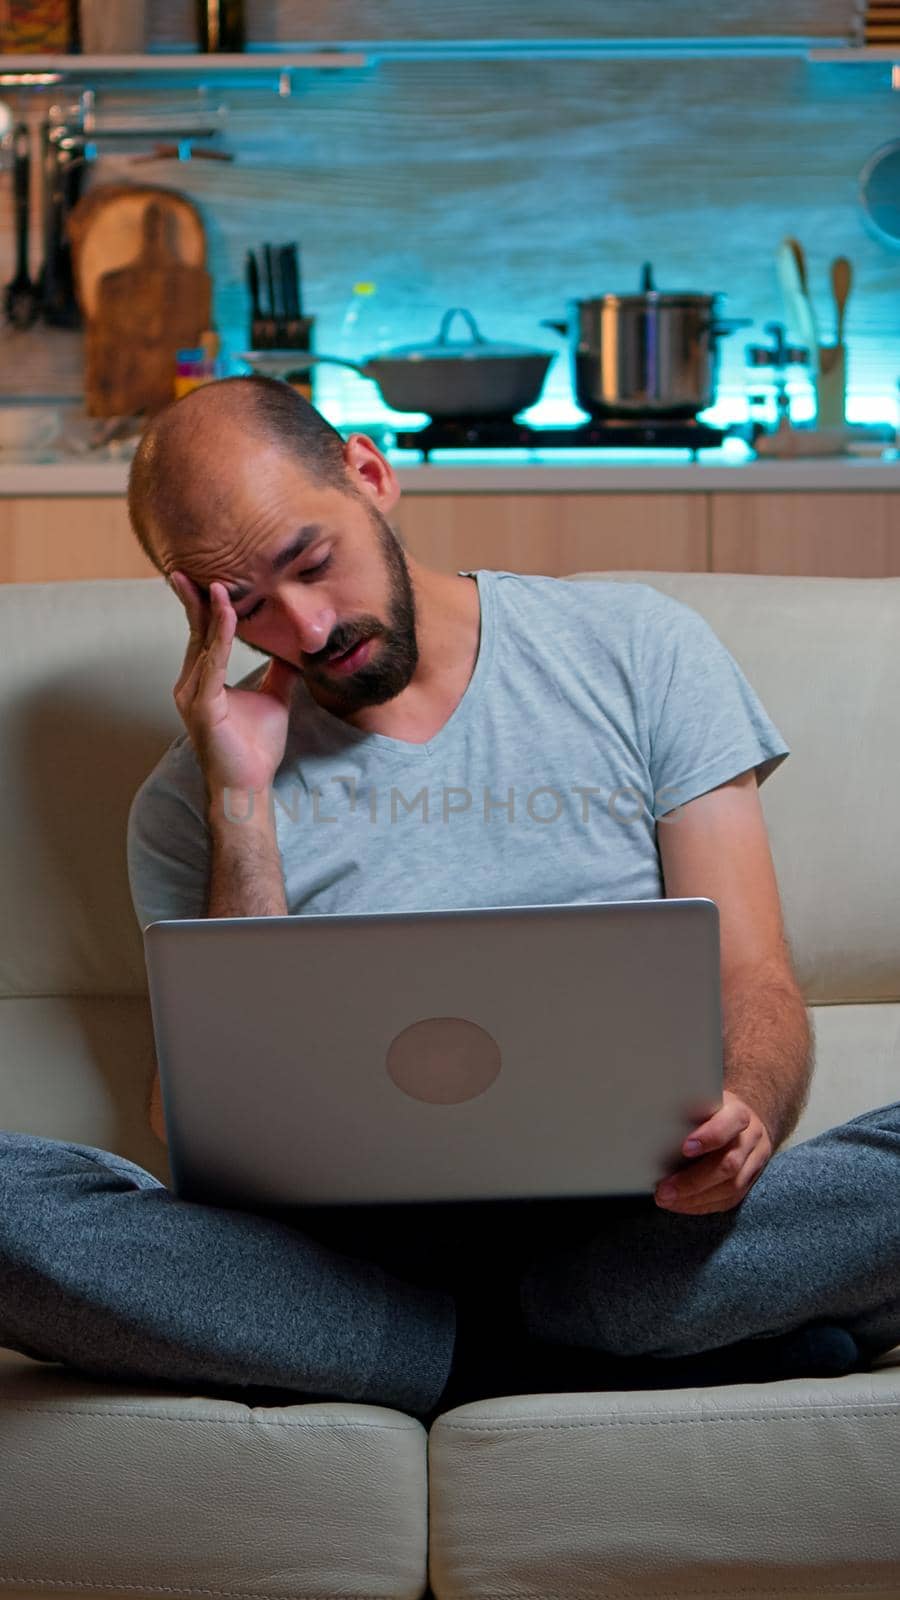 Tired man in pajams browsing on internet lifestyle information using laptop computer sitting on sofa. Freelancer working at online project in front on television late at night in kitchen